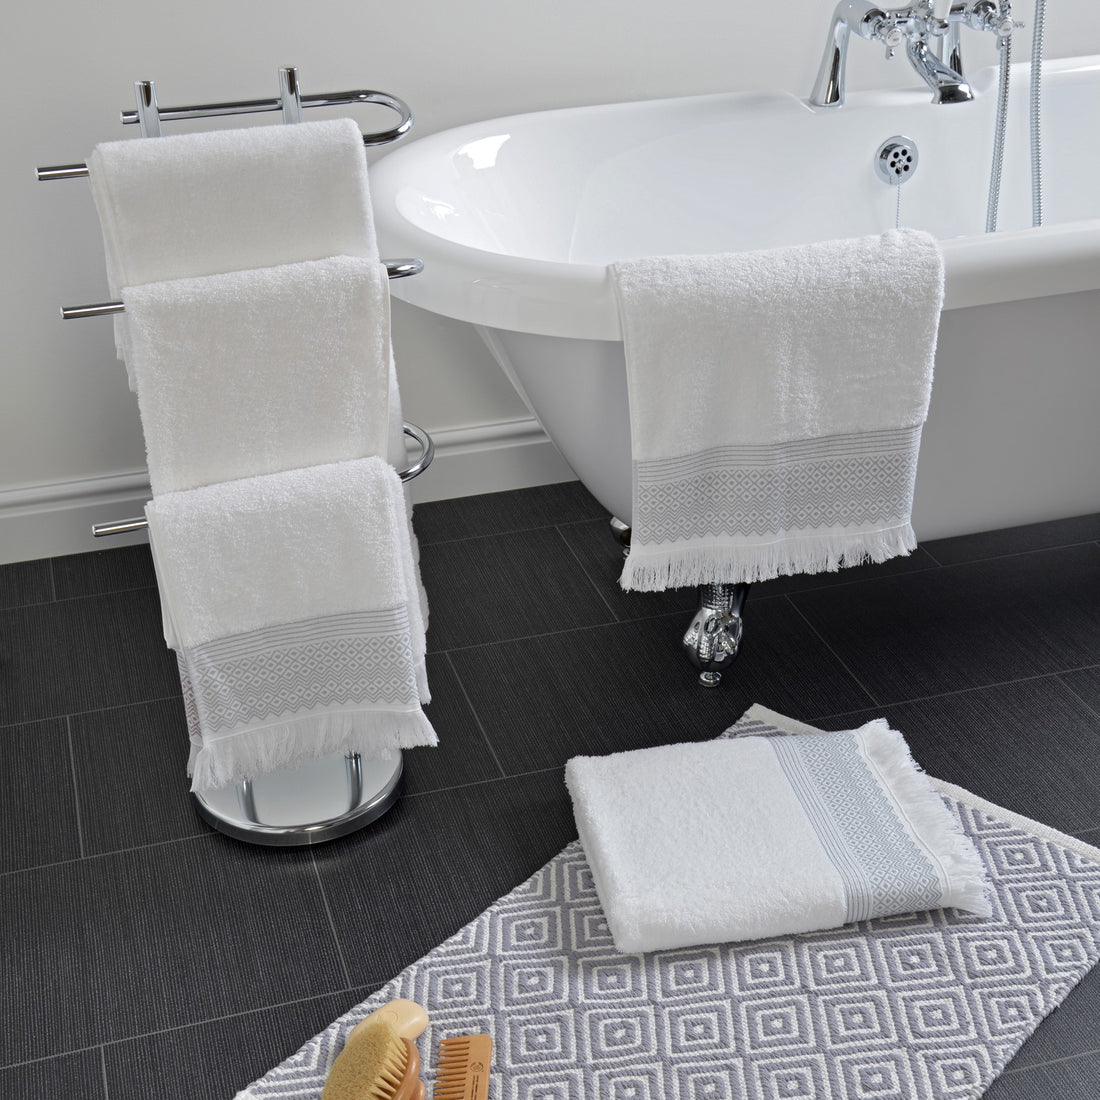 What is a guest towel? – Allure Bath Fashions